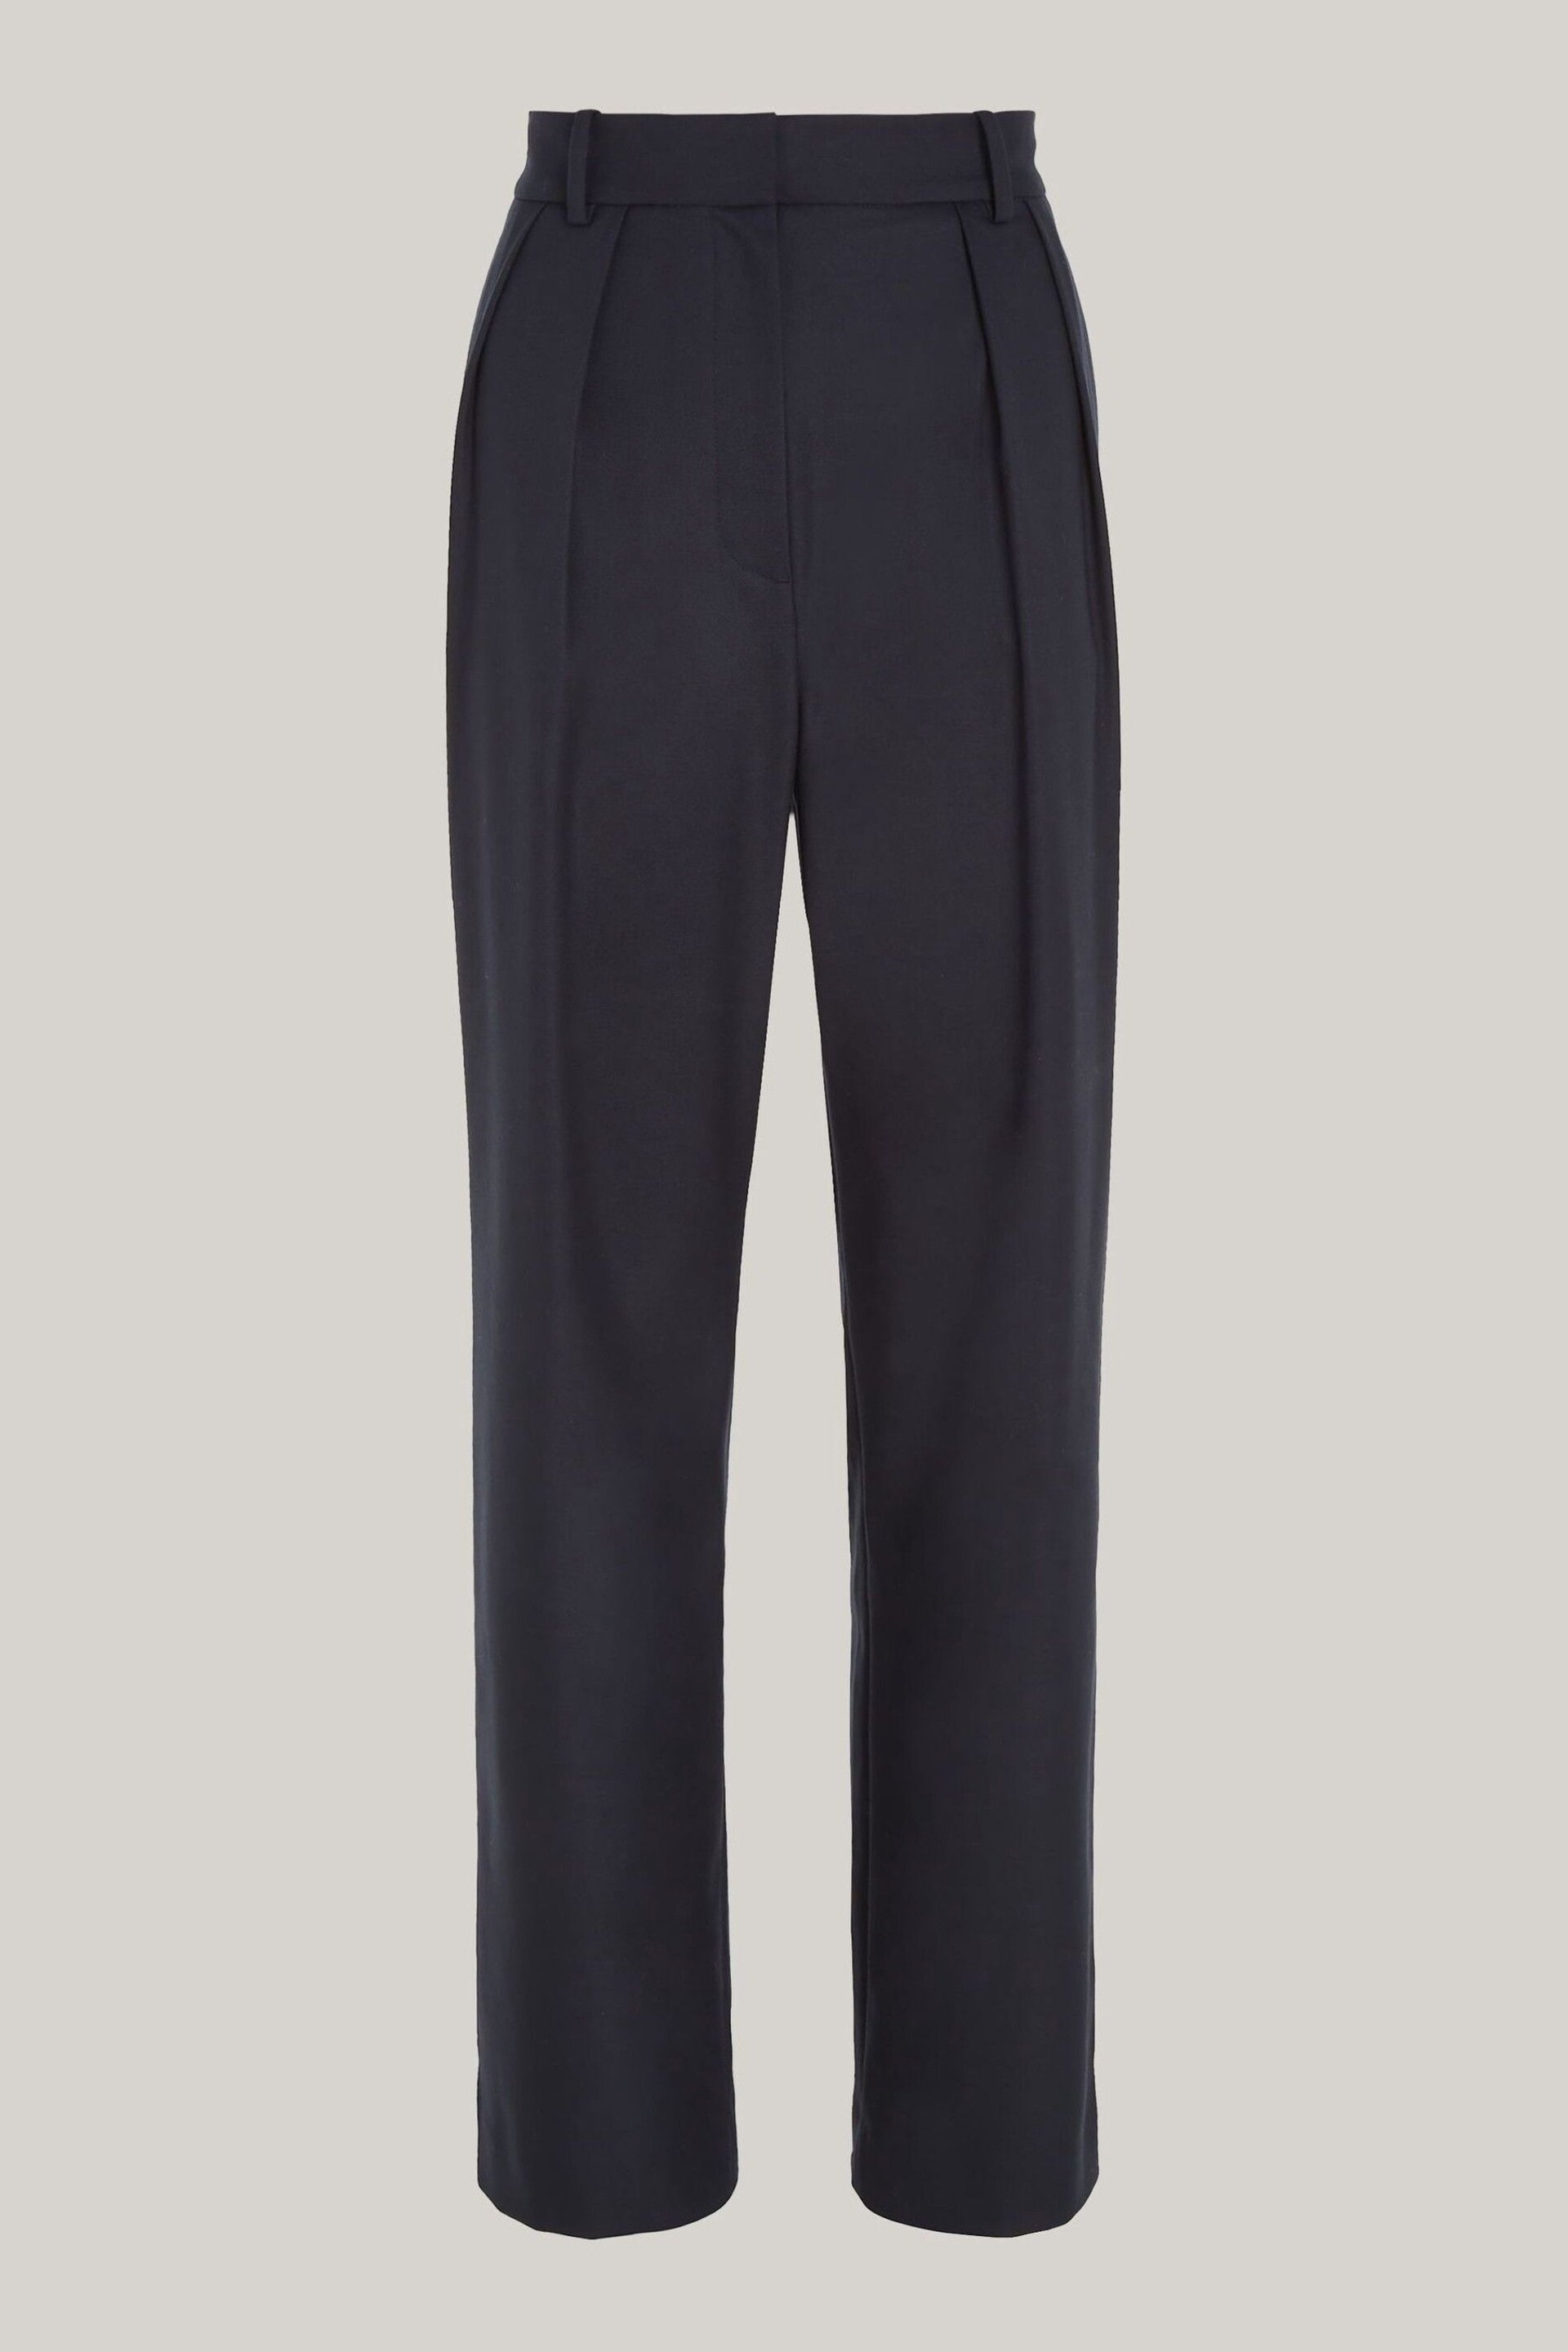 Tommy Hilfiger Relaxed Blue Straight Leg Trousers - Image 5 of 6